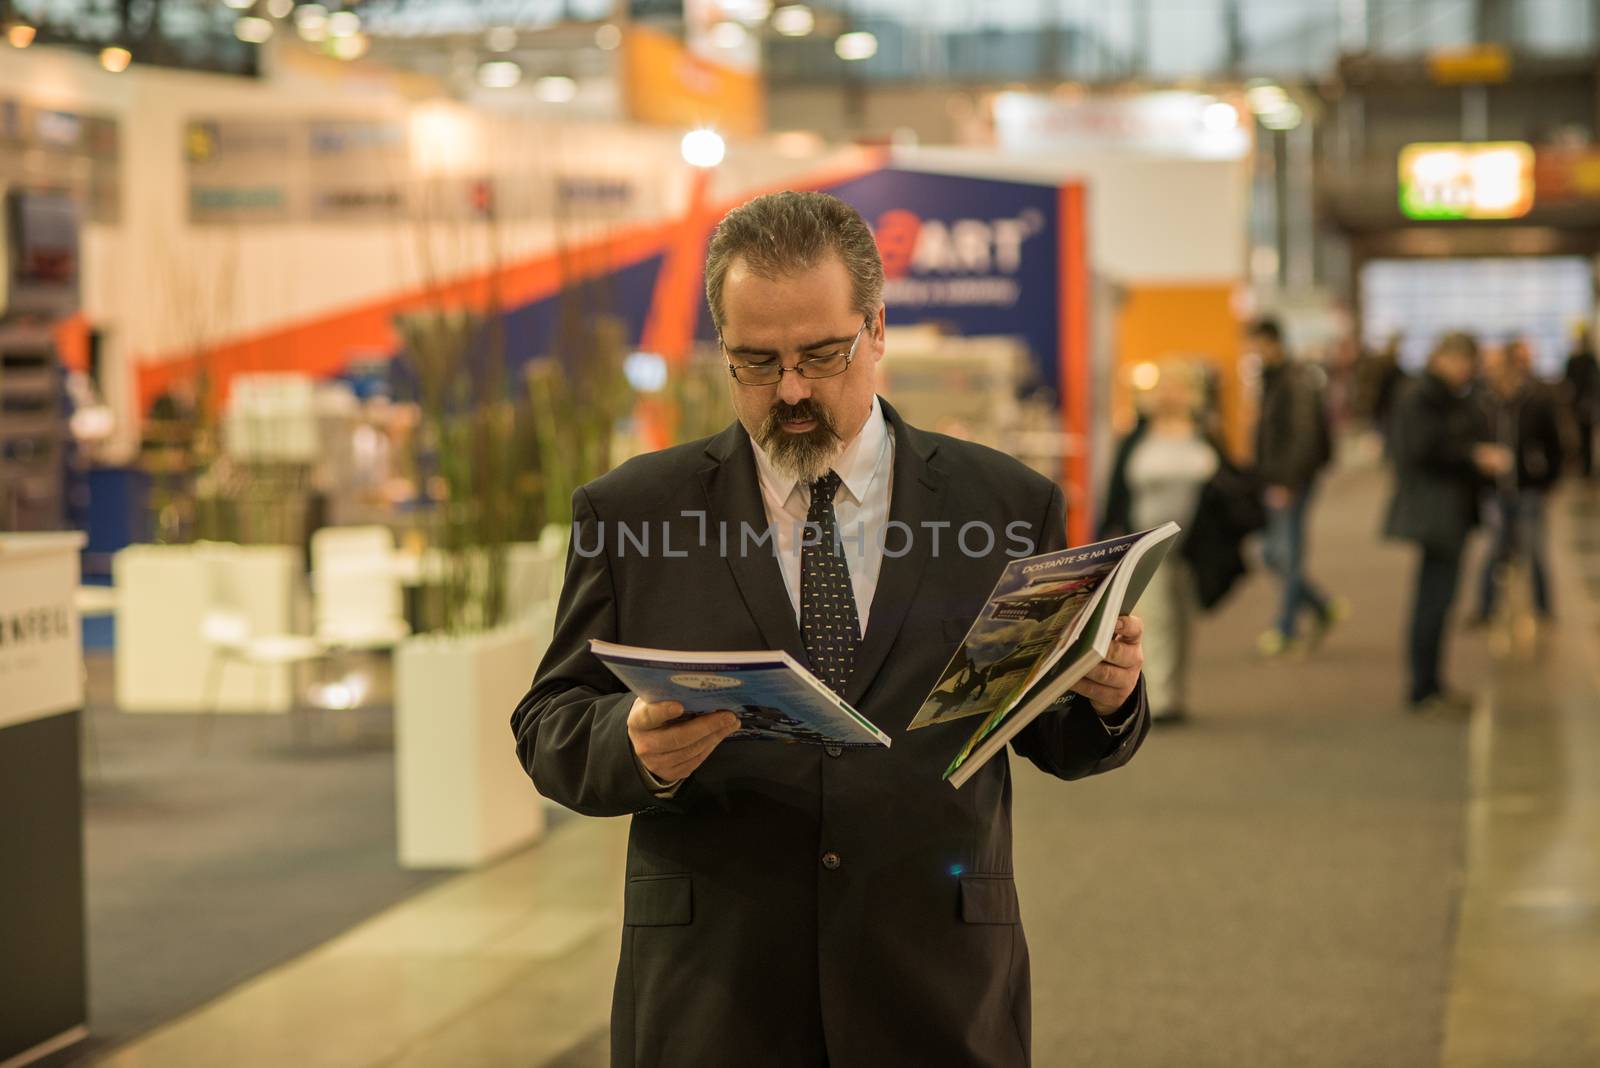 03/04/2018. Brno, Czech Republic. Man reading a report during a convention at the Brno Exhibition Center (BVV trade fairs brno) by gonzalobell